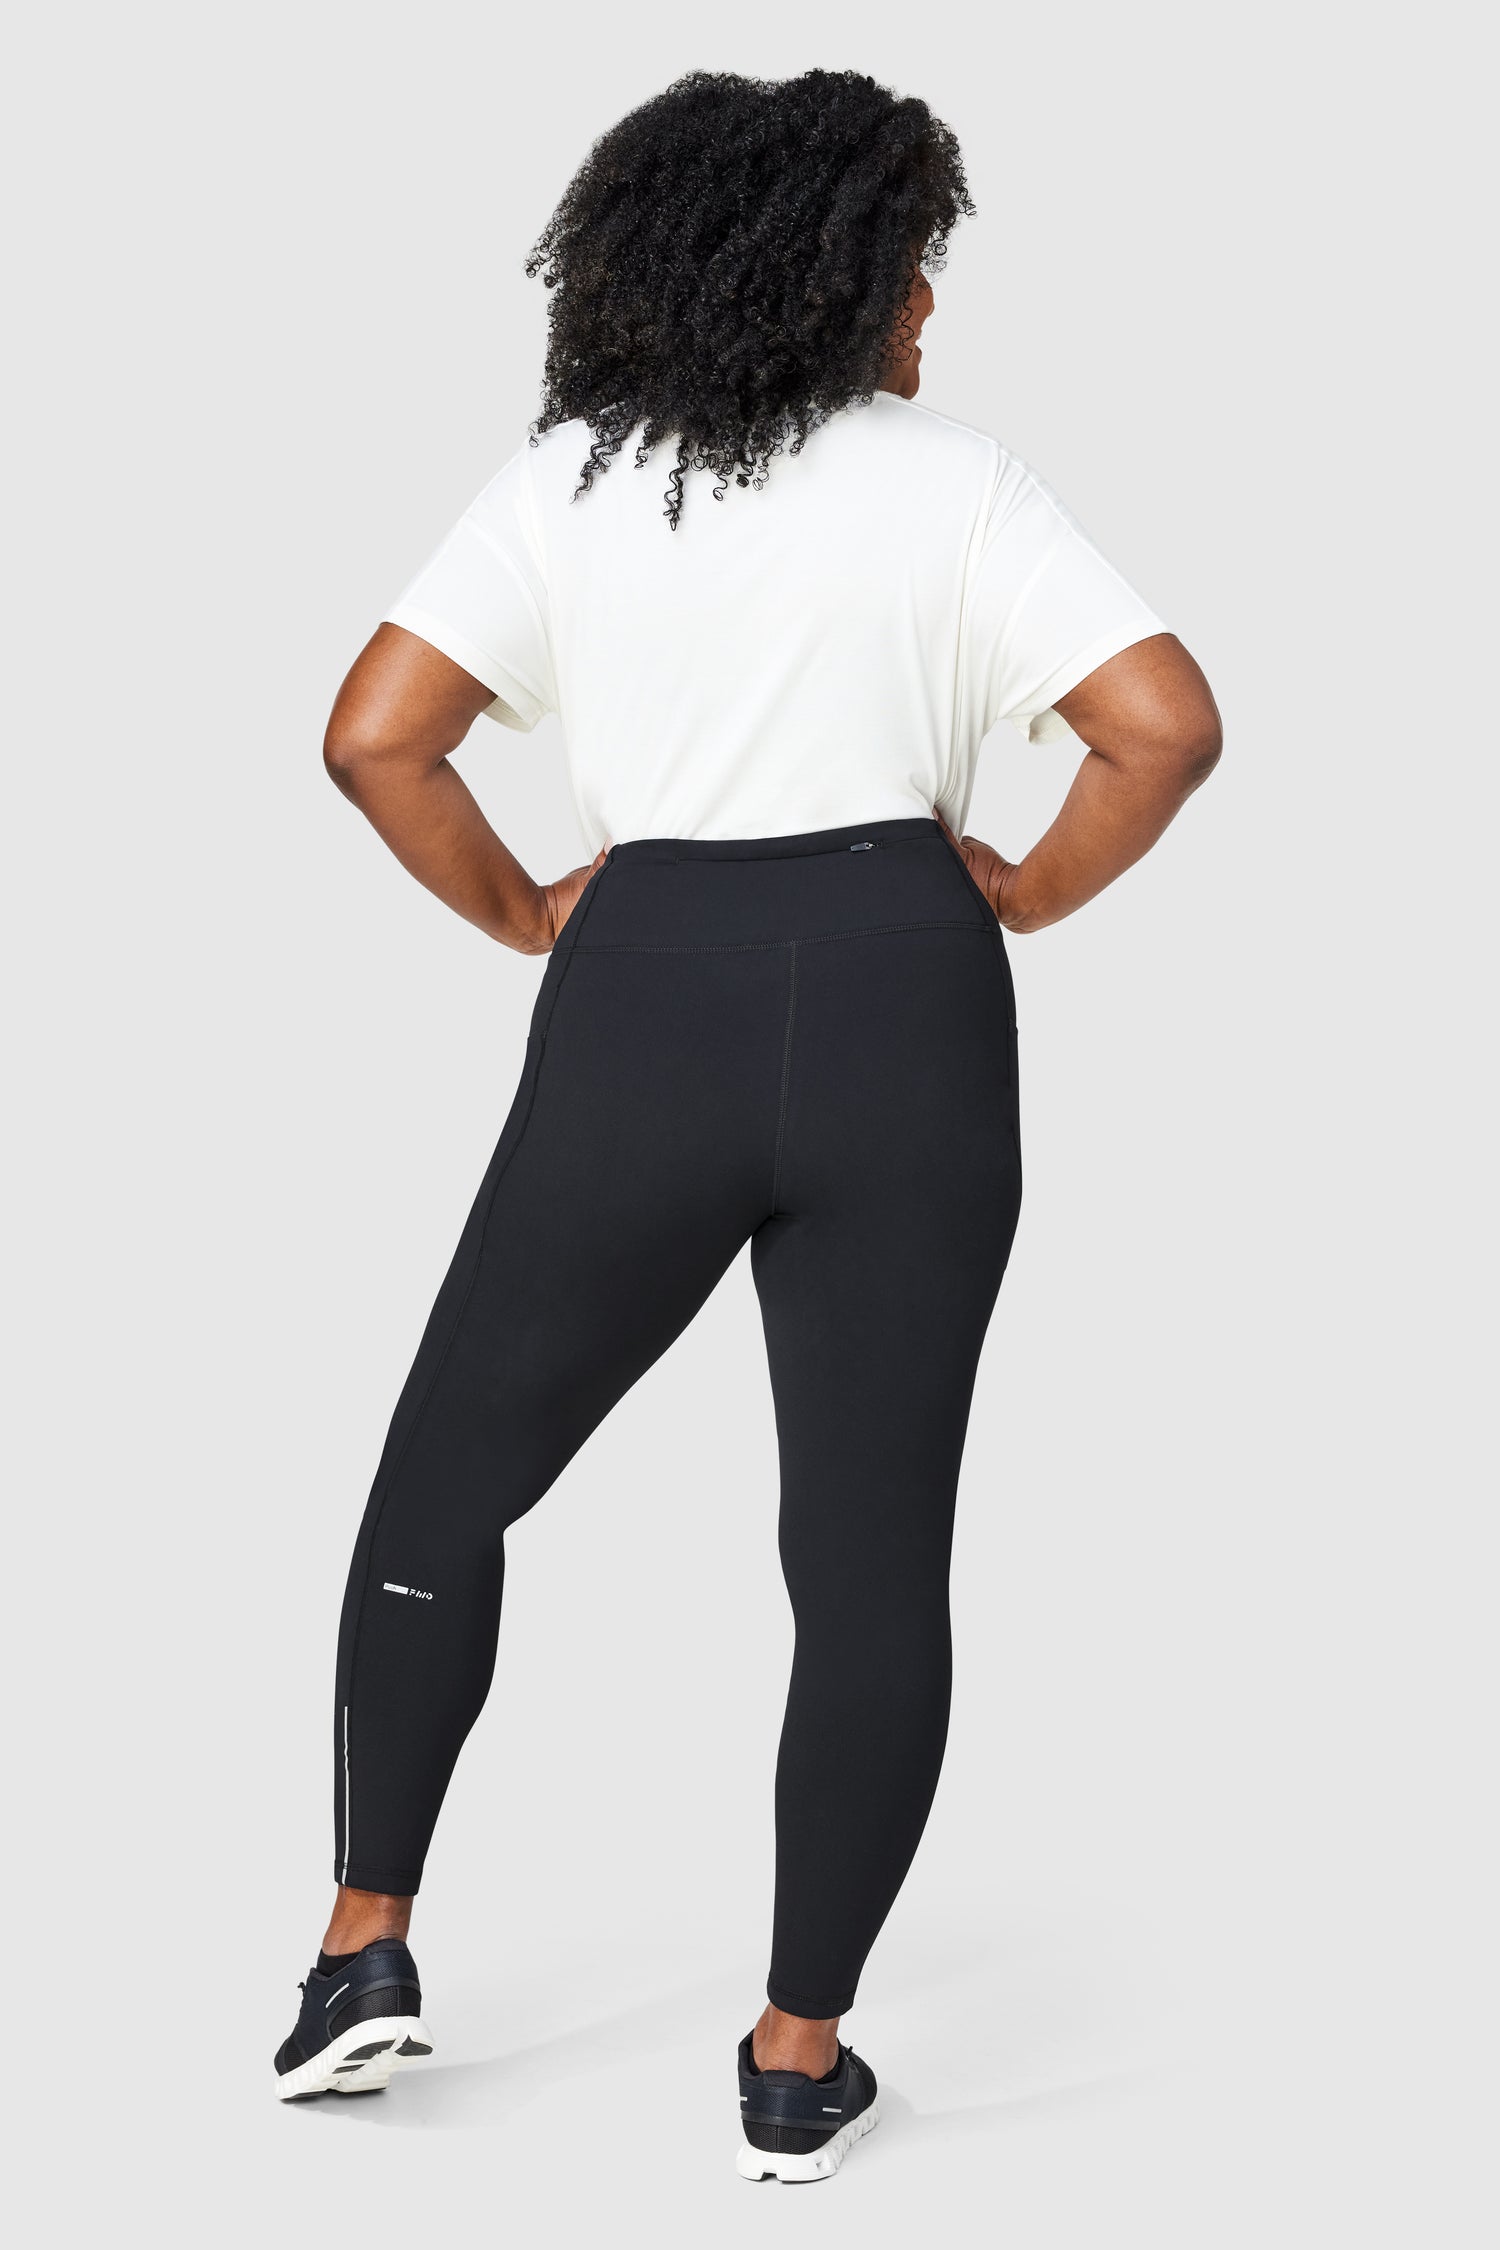 New sportswear: a Christmas Linden and two types of leggings